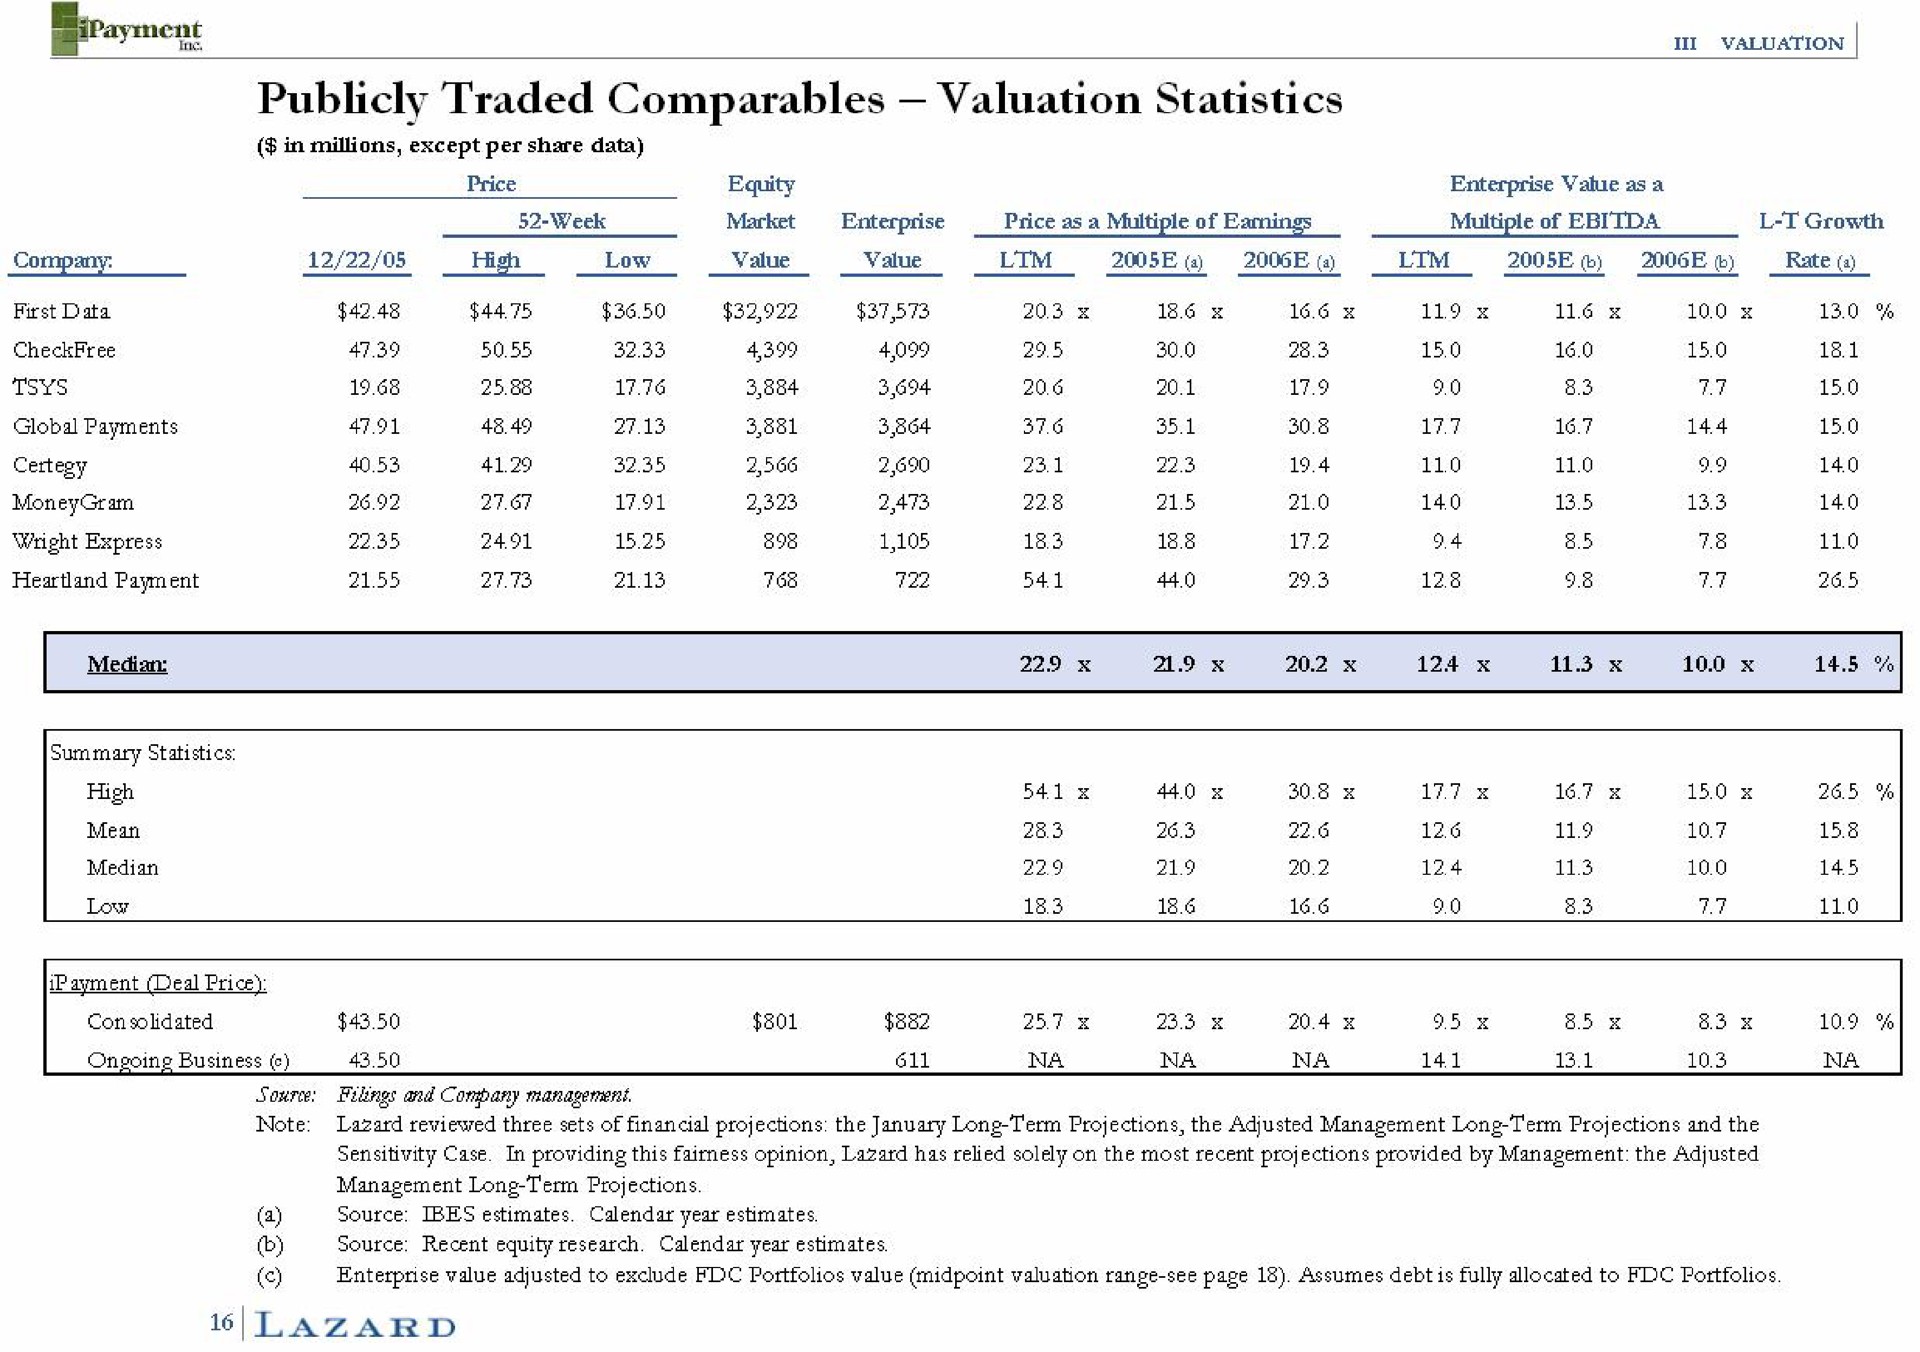 publicly traded valuation statistics | Lazard